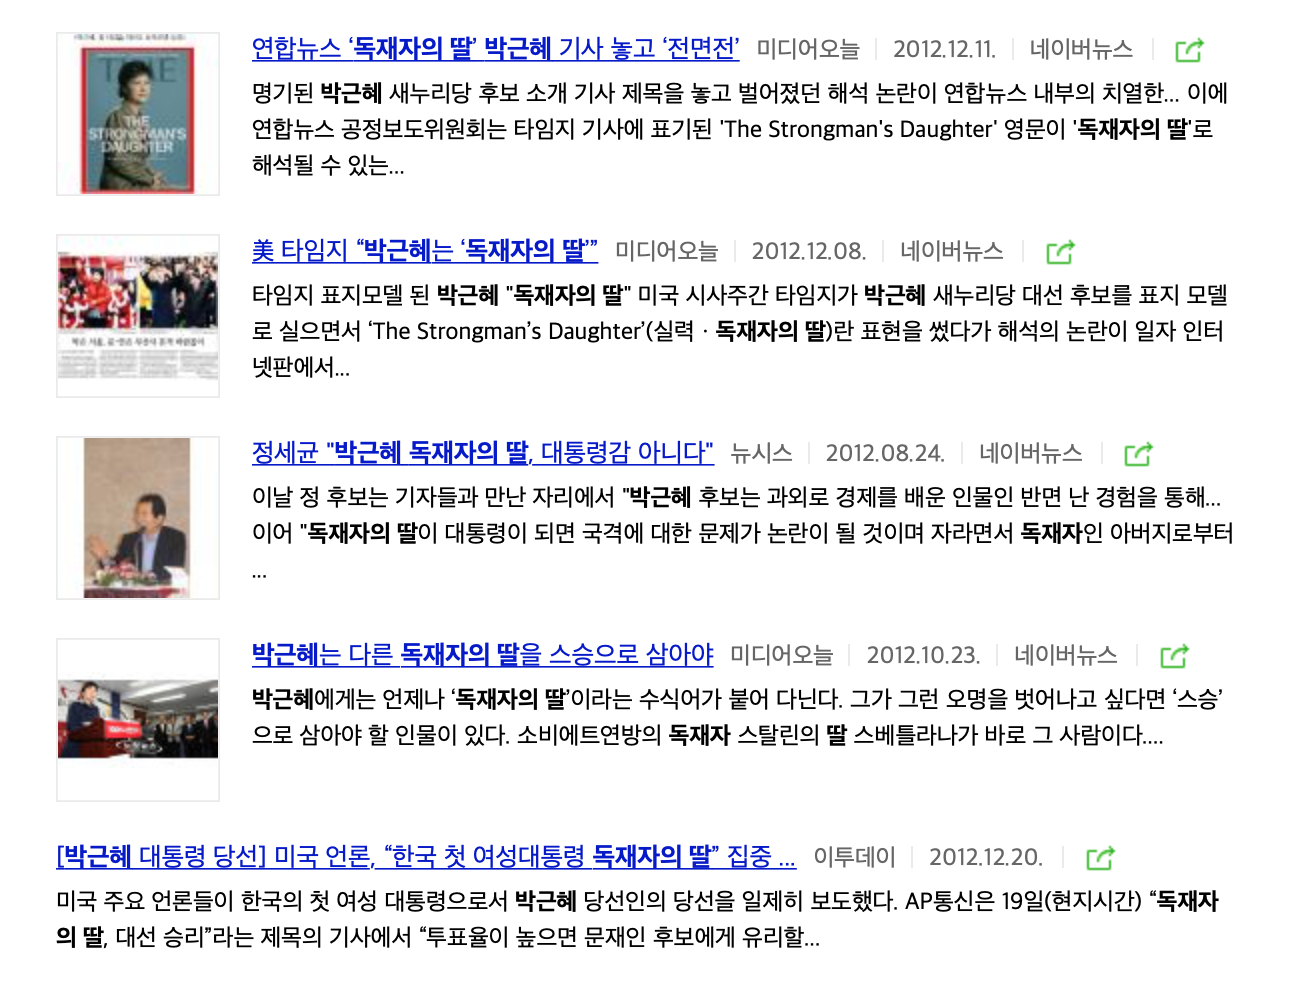 The image is showing the lists of article titles that include "Dictator's Daughter" to describe Geun-hye Park, the previous president of South Korea.